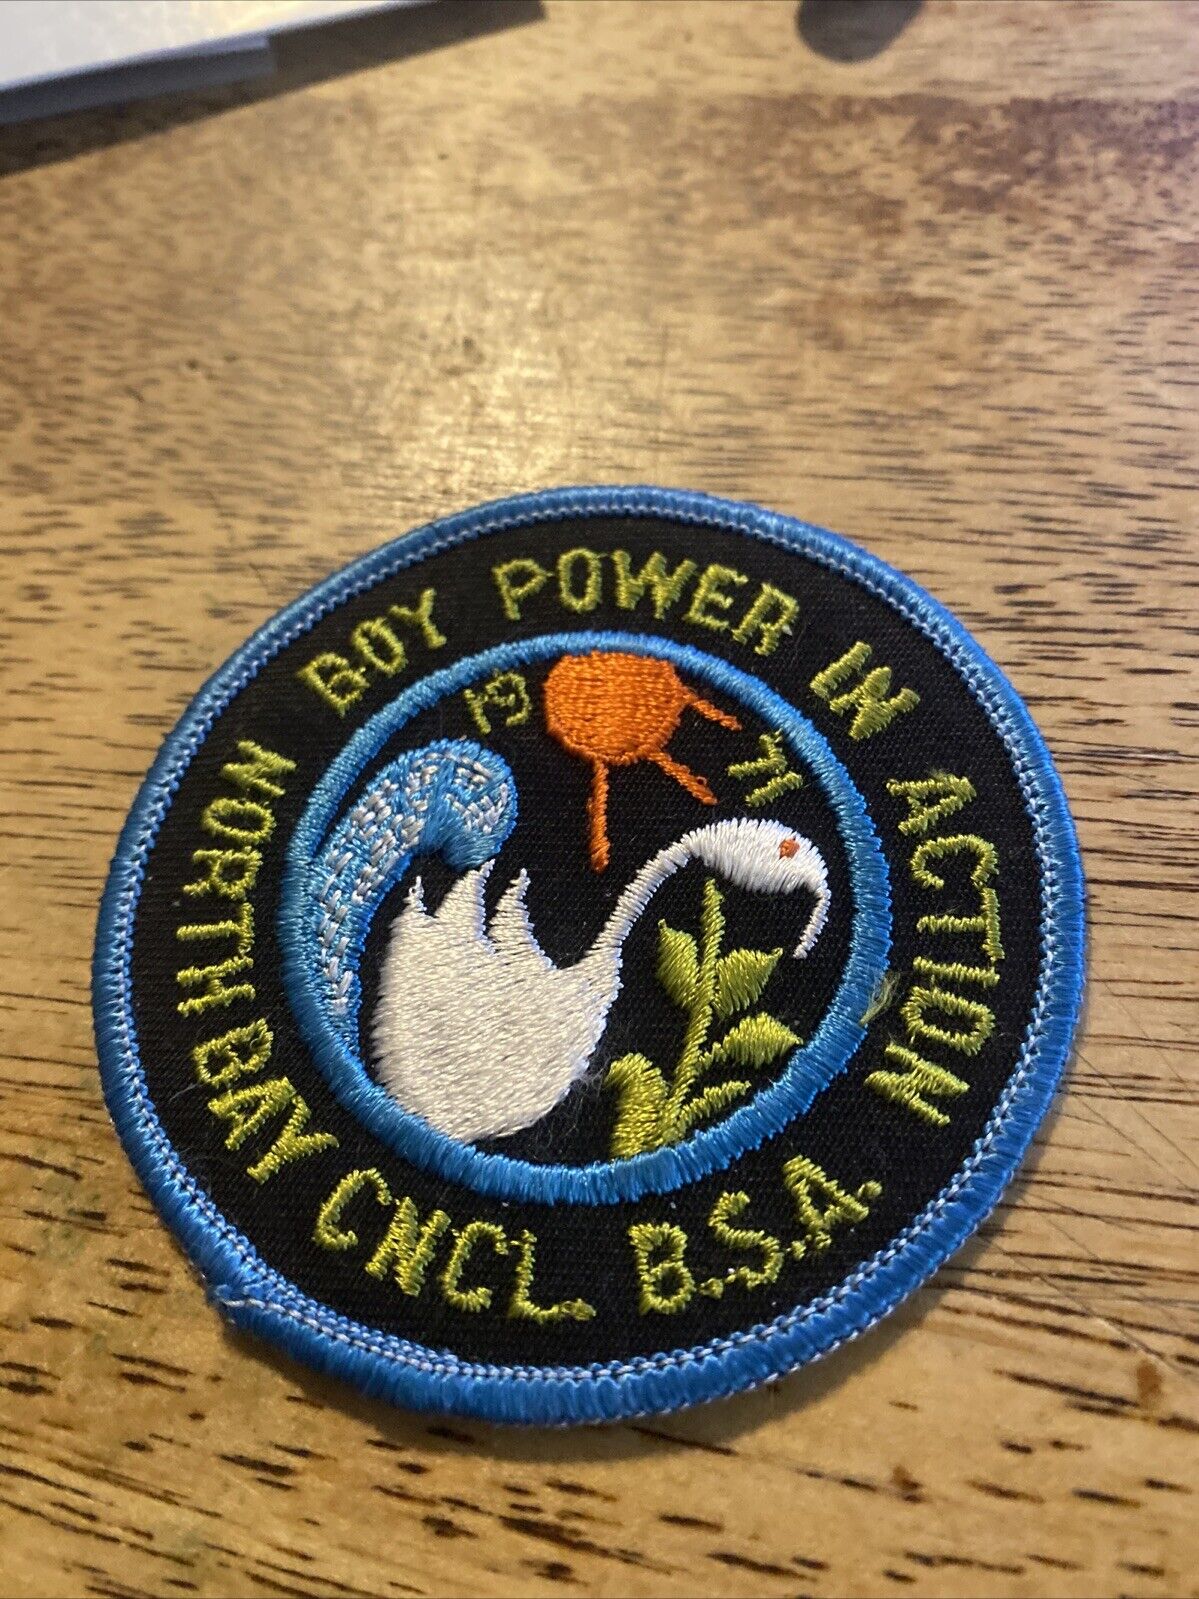 1971 North Bay Council Boy Power in Action  BSA Boy Scouts 64B-1103G